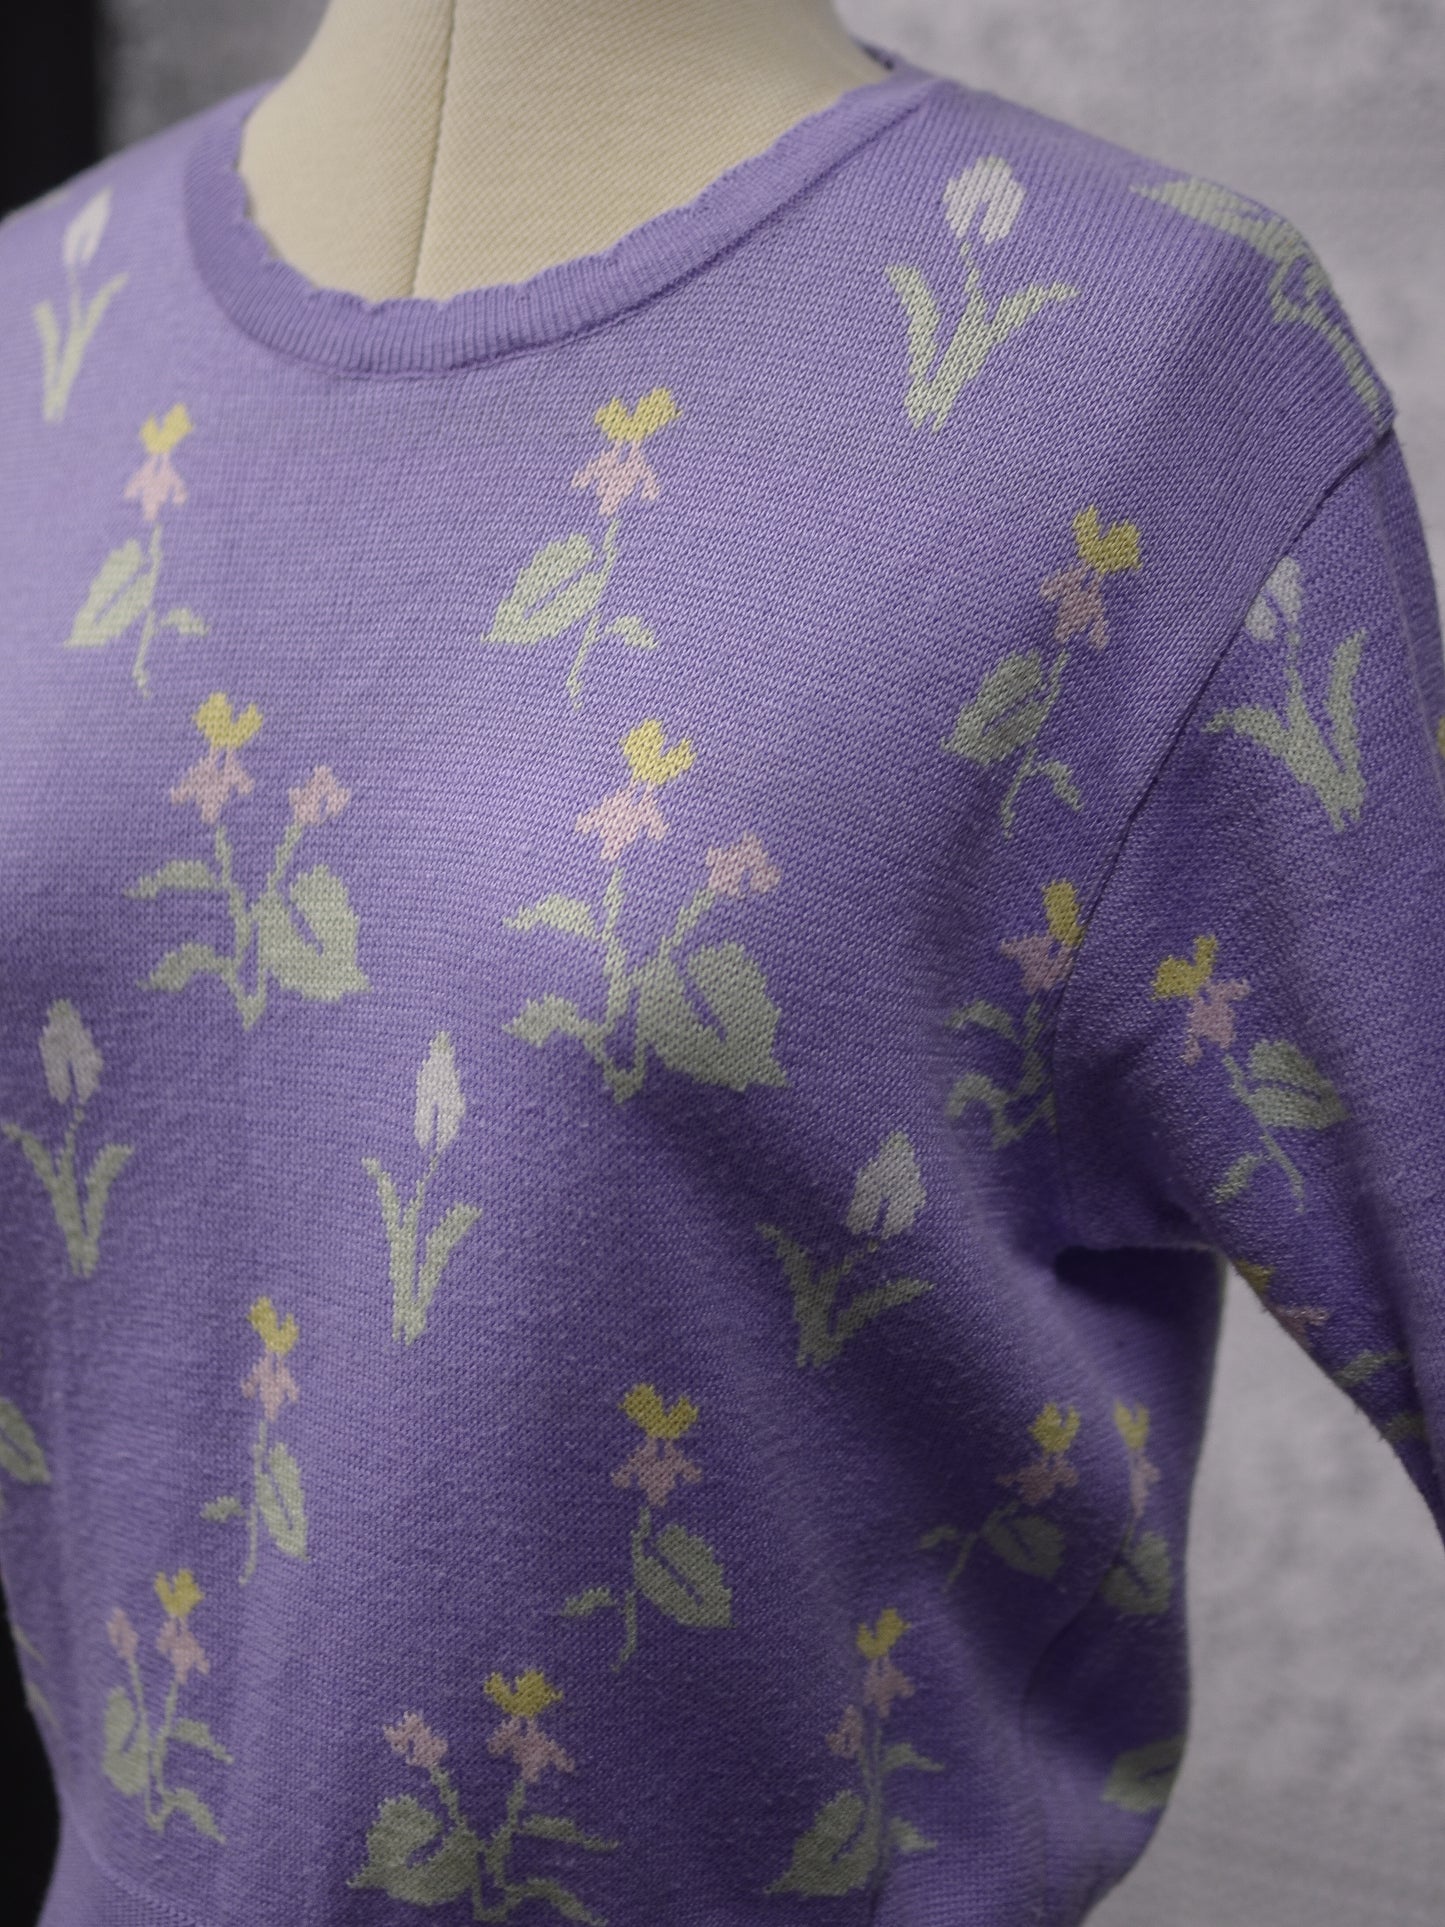 1990s St Michael lilac purple and yellow floral short sleeved jumper